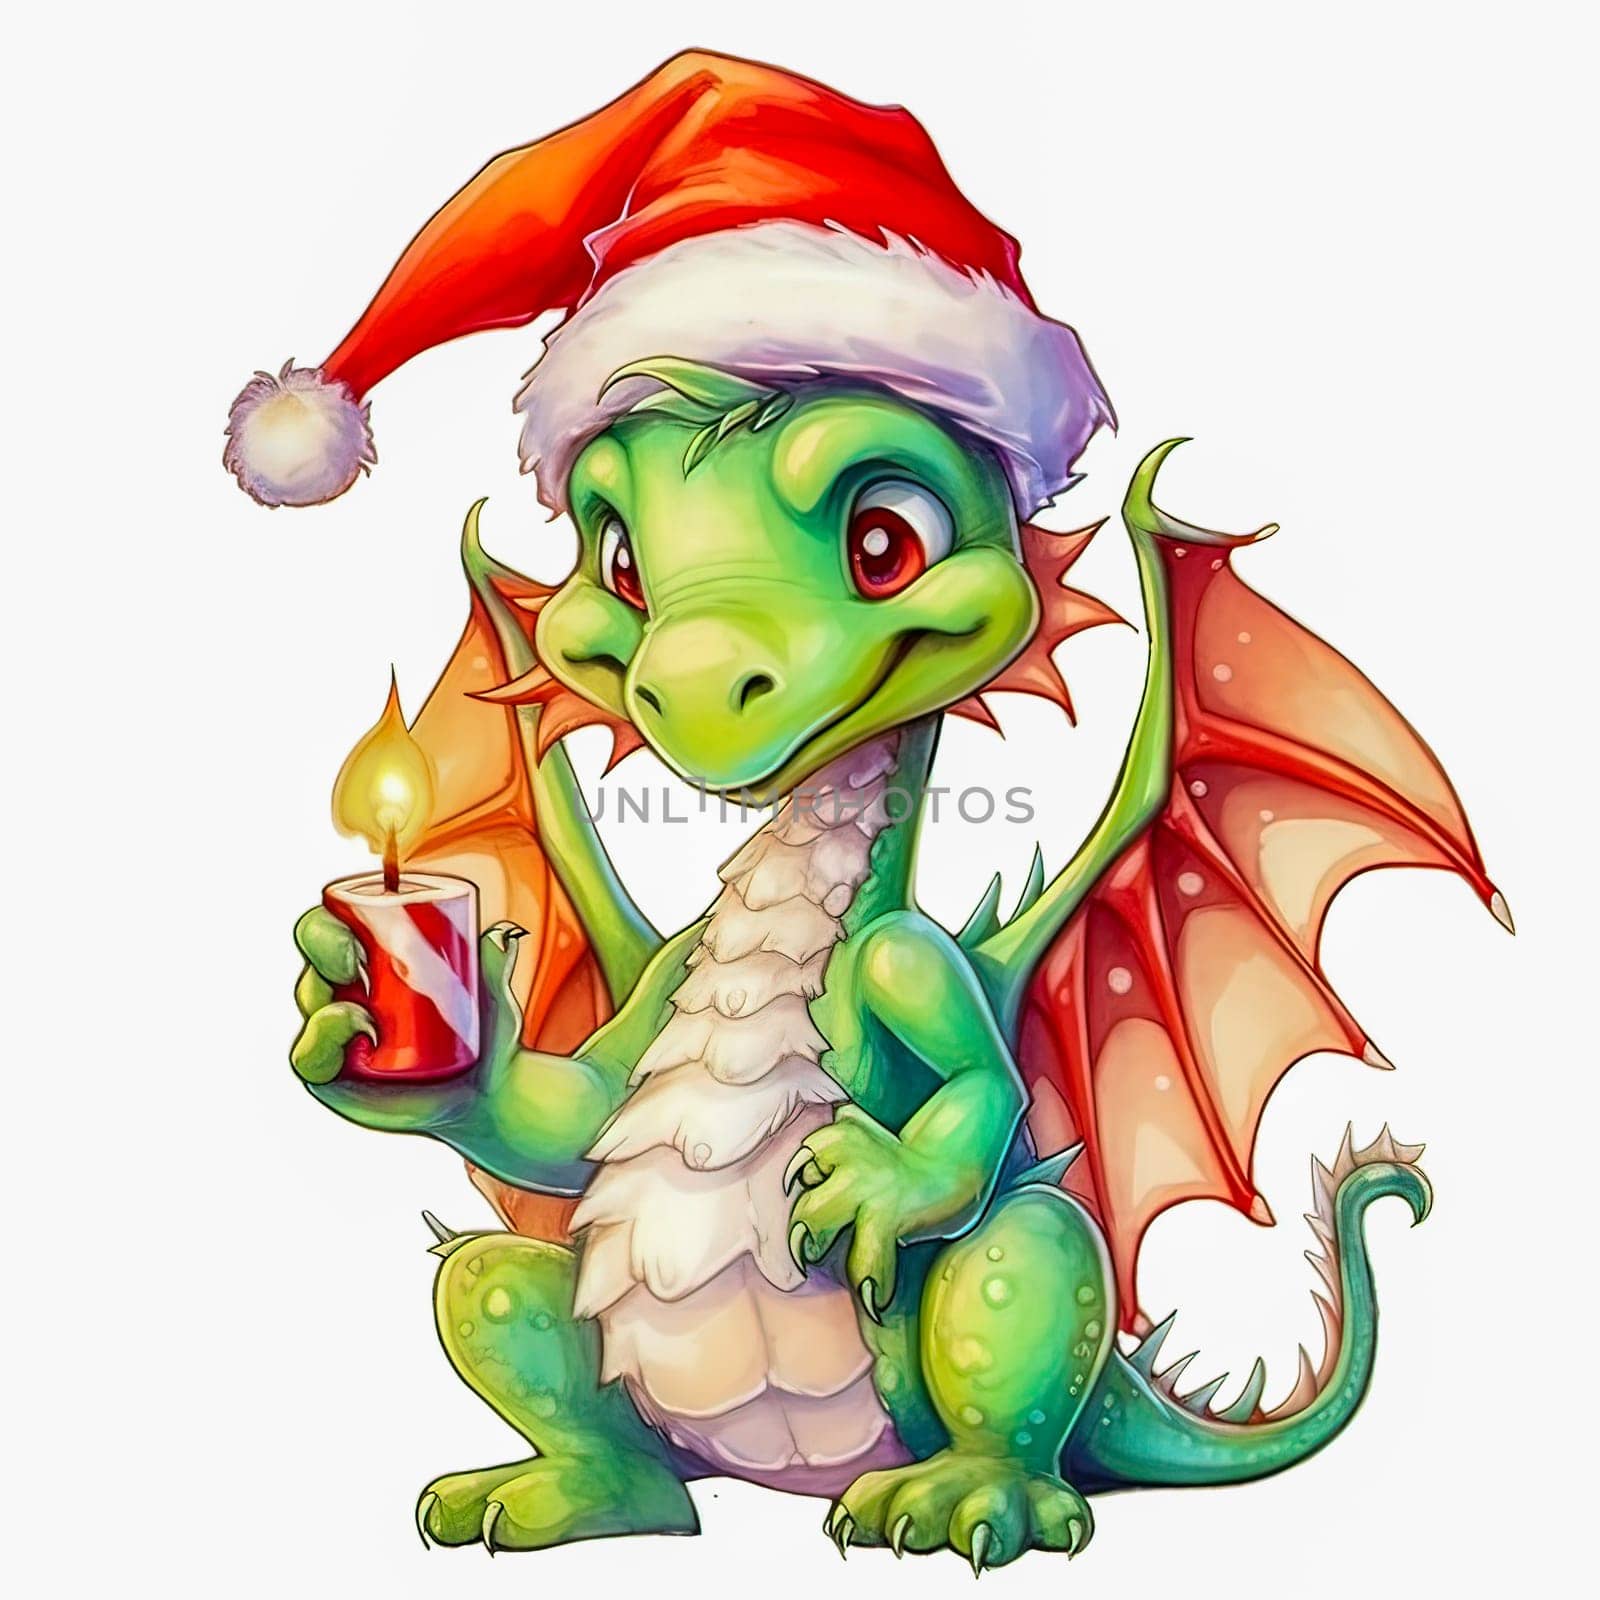 Illustration of a small green dragon in a red cap with a Christmas candle on a white background. Year of the dragon. New Year illustration. High quality illustration